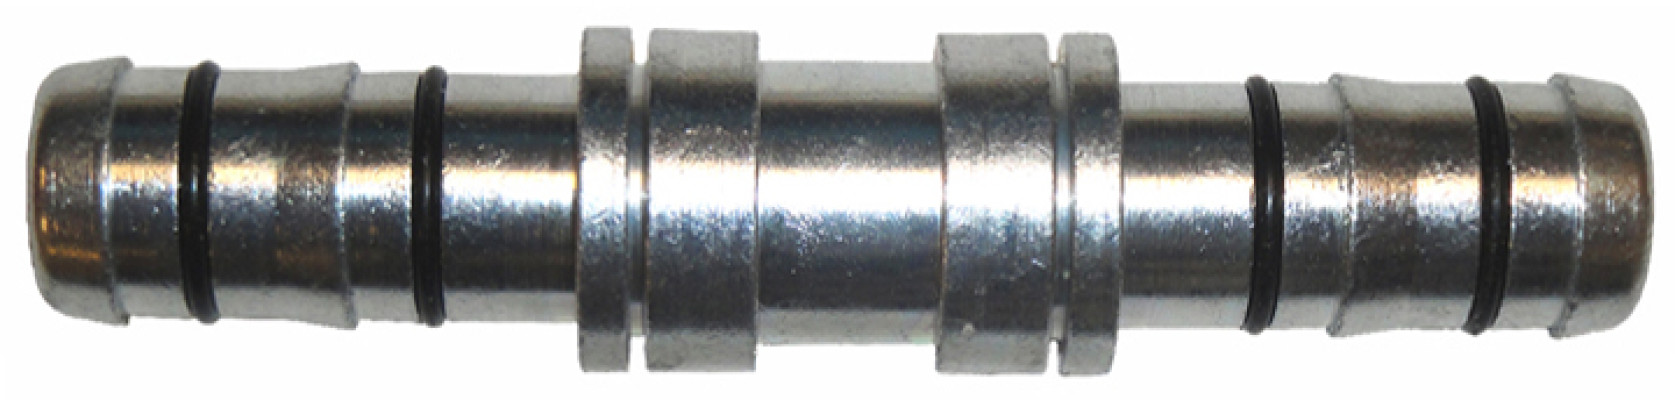 Image of A/C Refrigerant Hose Fitting from Sunair. Part number: FF14385